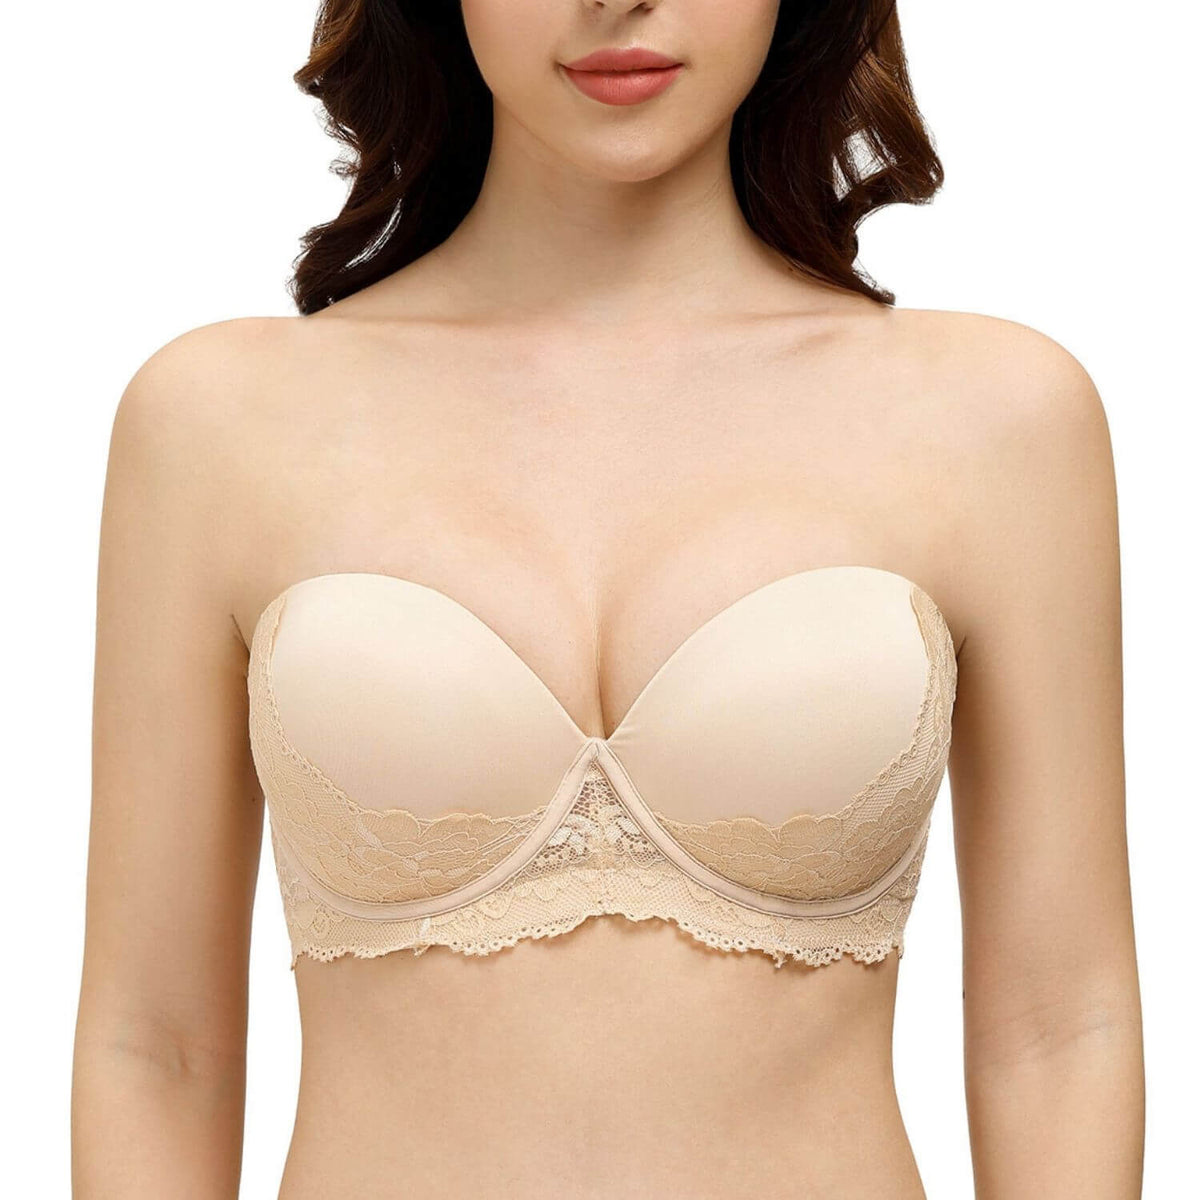 YBCG Push up Strapless Convertible Thick Padded Underwire